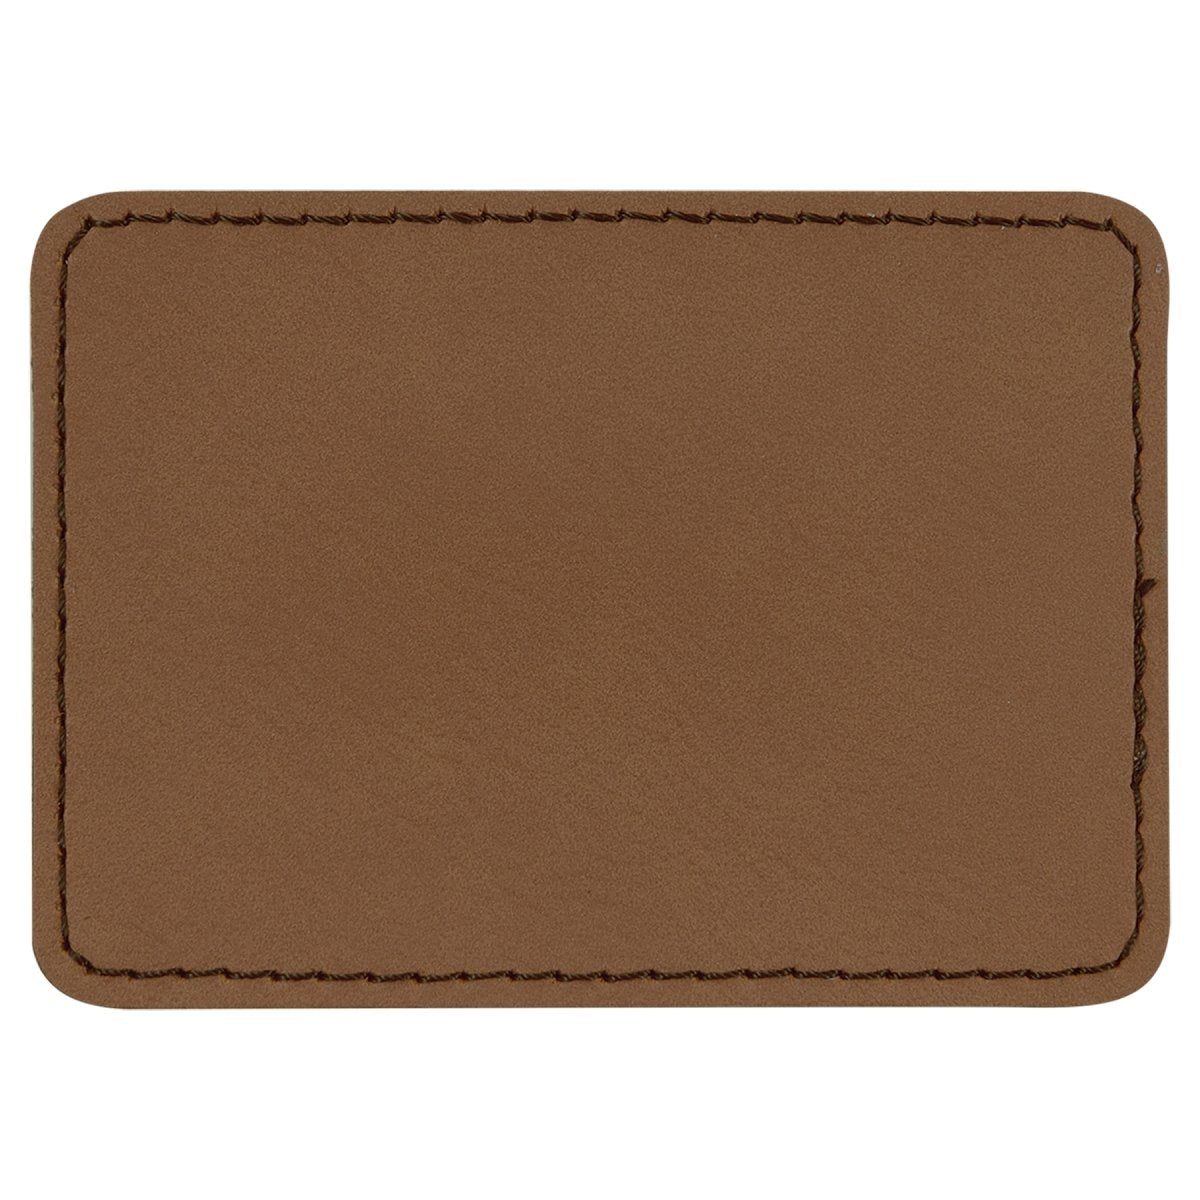 Rectangle Laserable Leatherette Patch with Adhesive, 3.5" x 2.5", Pack of 5 - Inkfinitee Sublimation